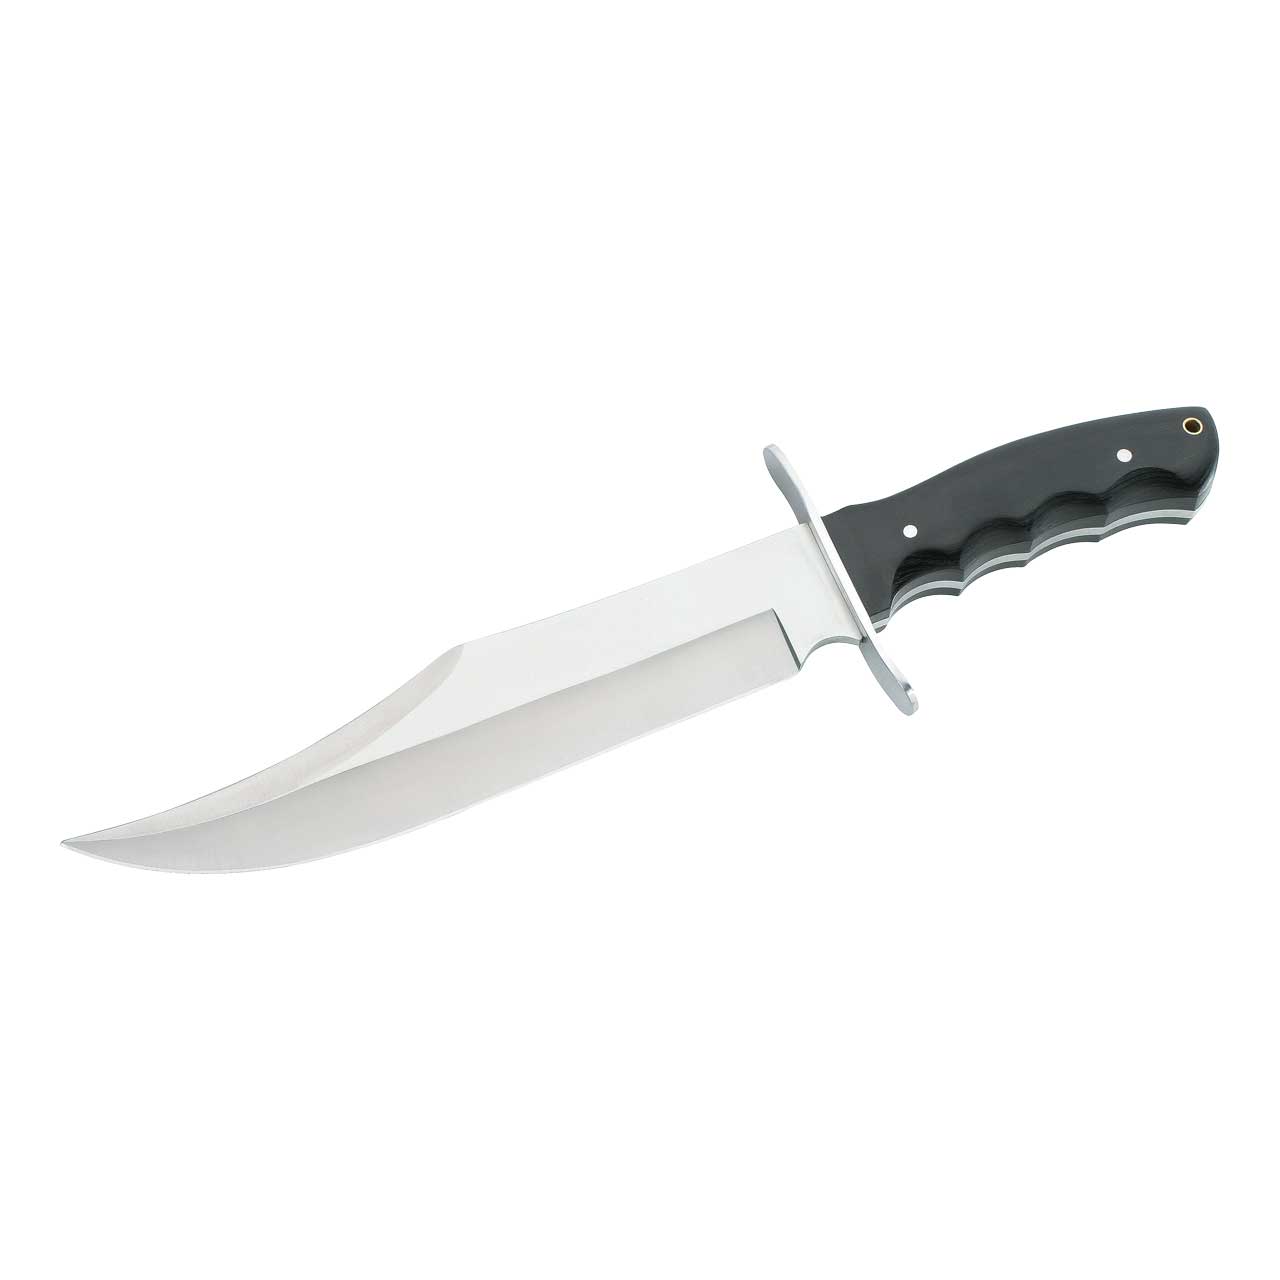 Picture of Herbertz - Bowie Knife 102325